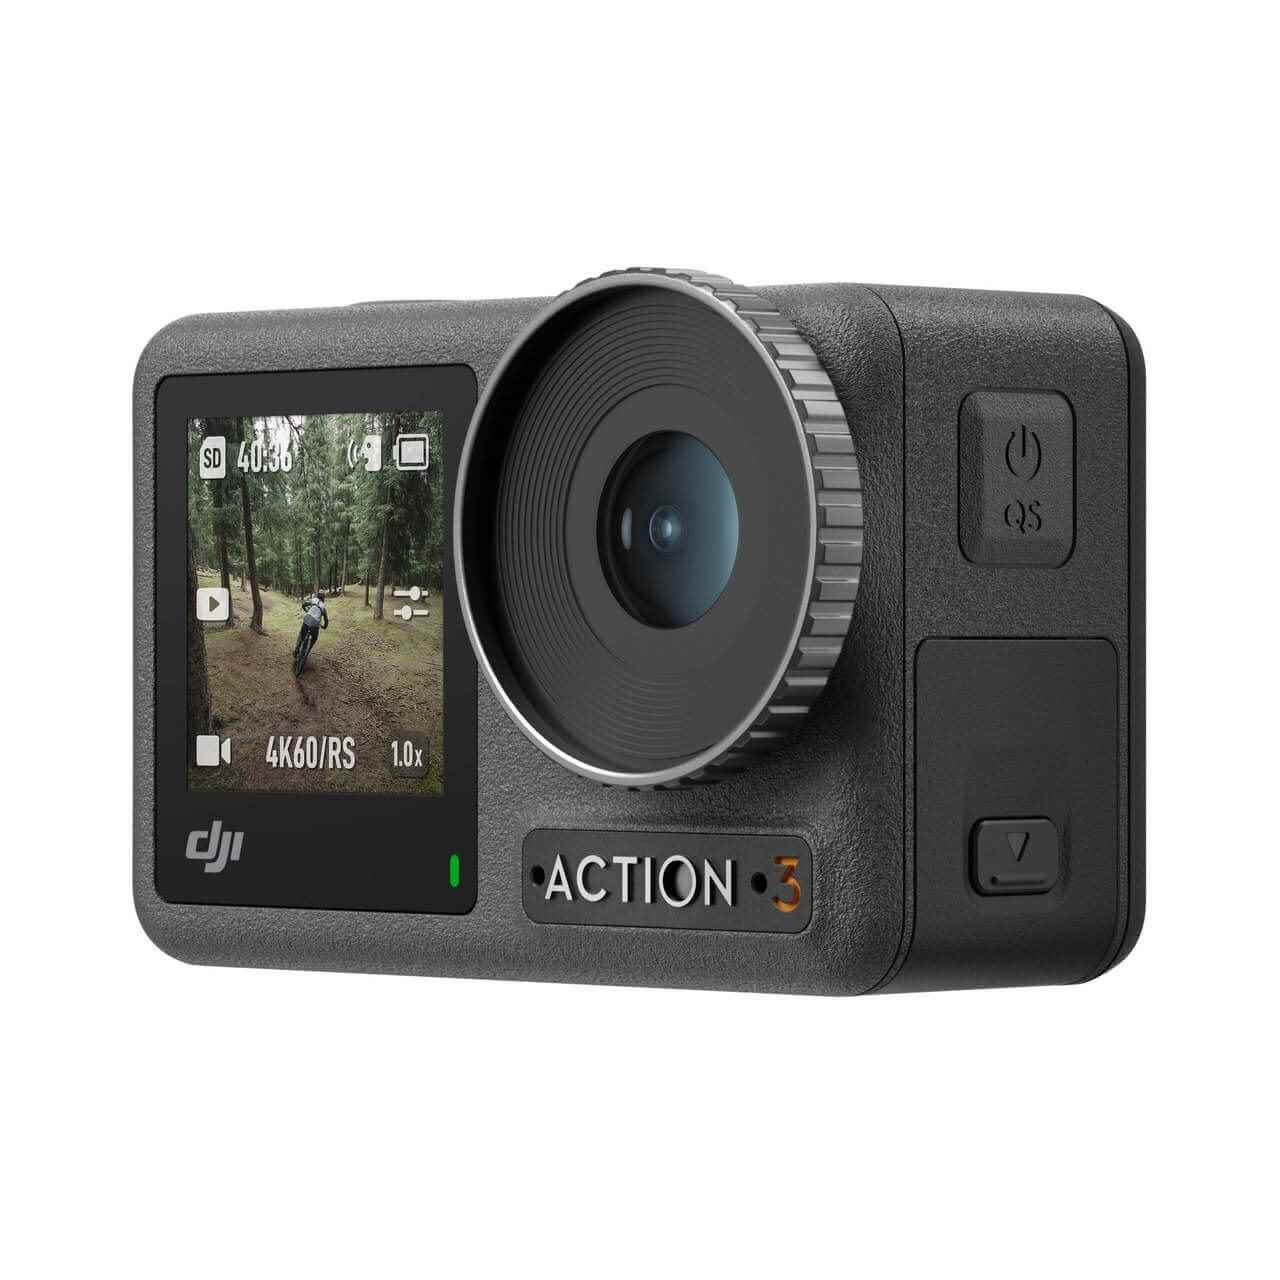 1663183776 308 DJI Osmo Action 3 Introduced Features and Price